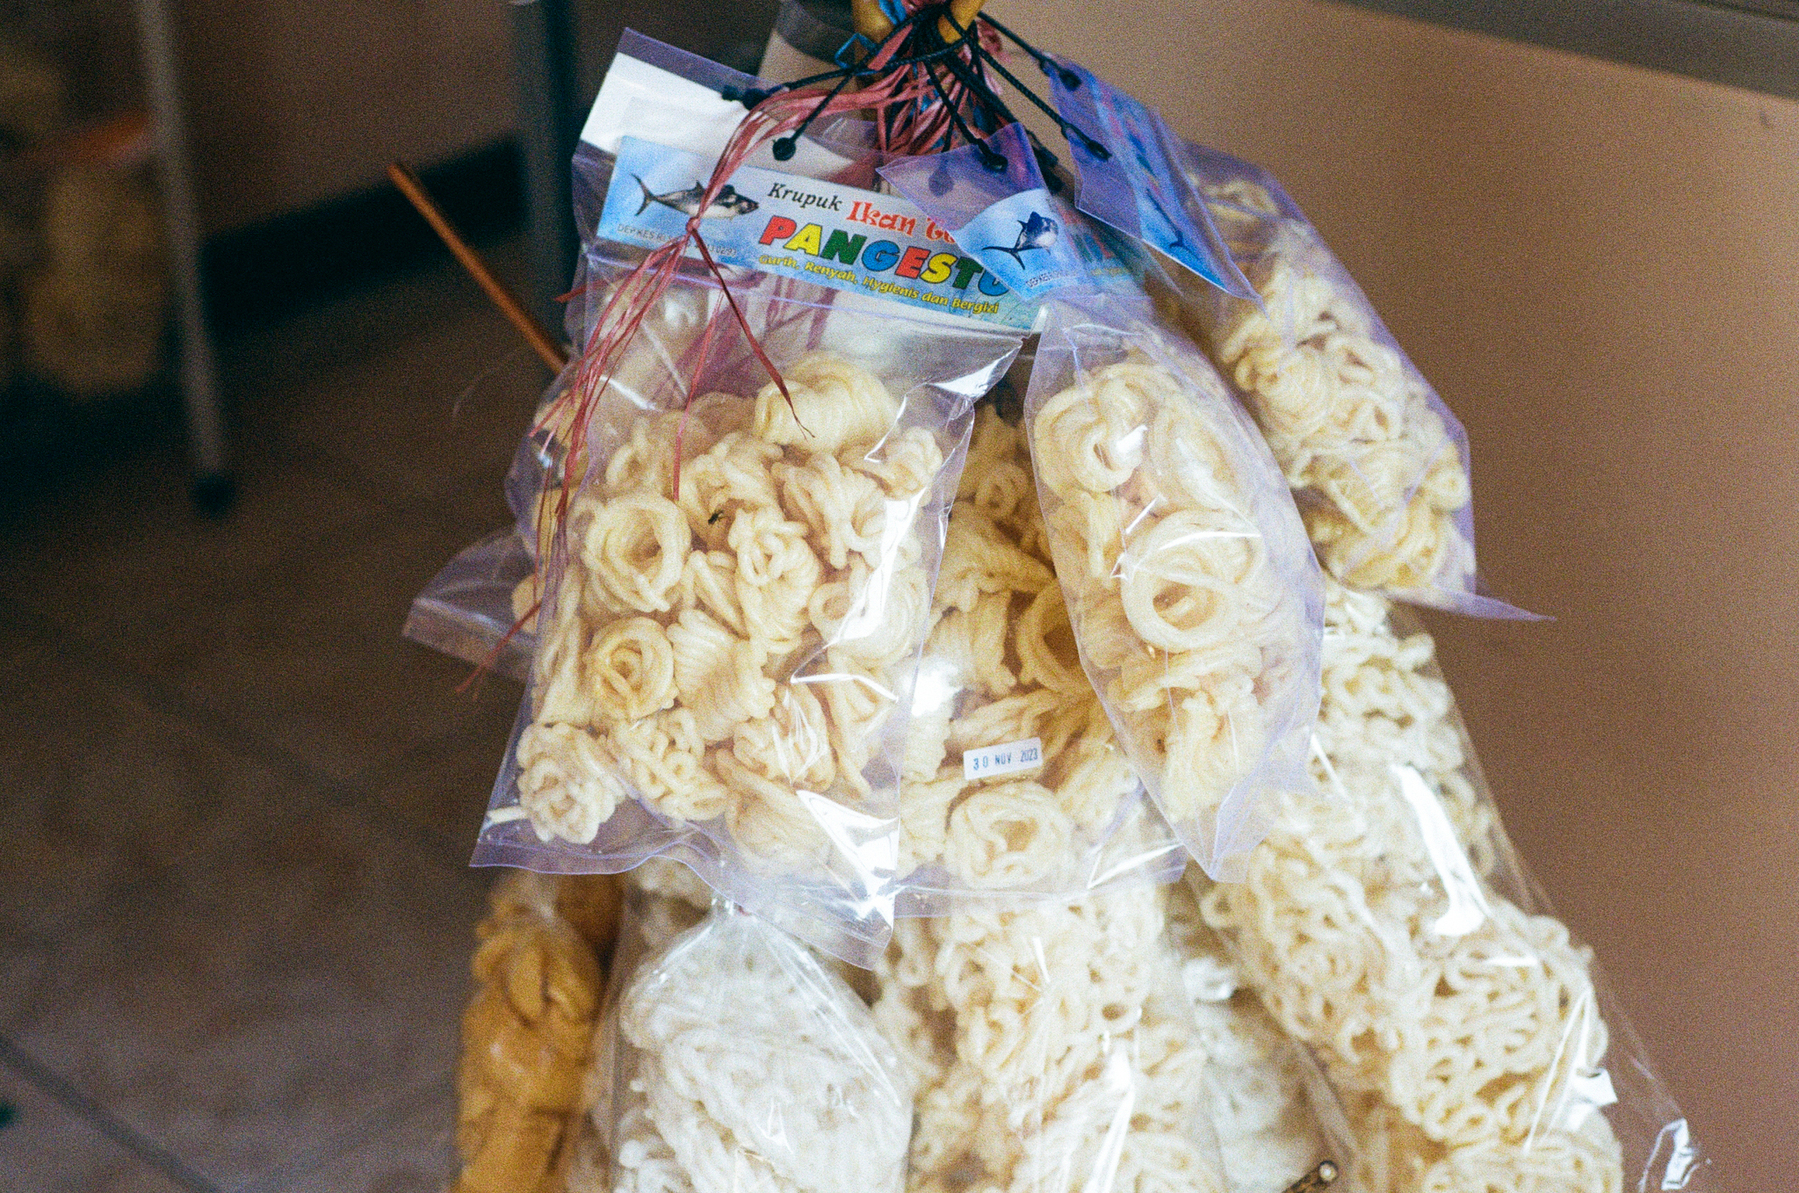 a scan of a color photo showing bags of krupuk (Indonesian crackers) hanging